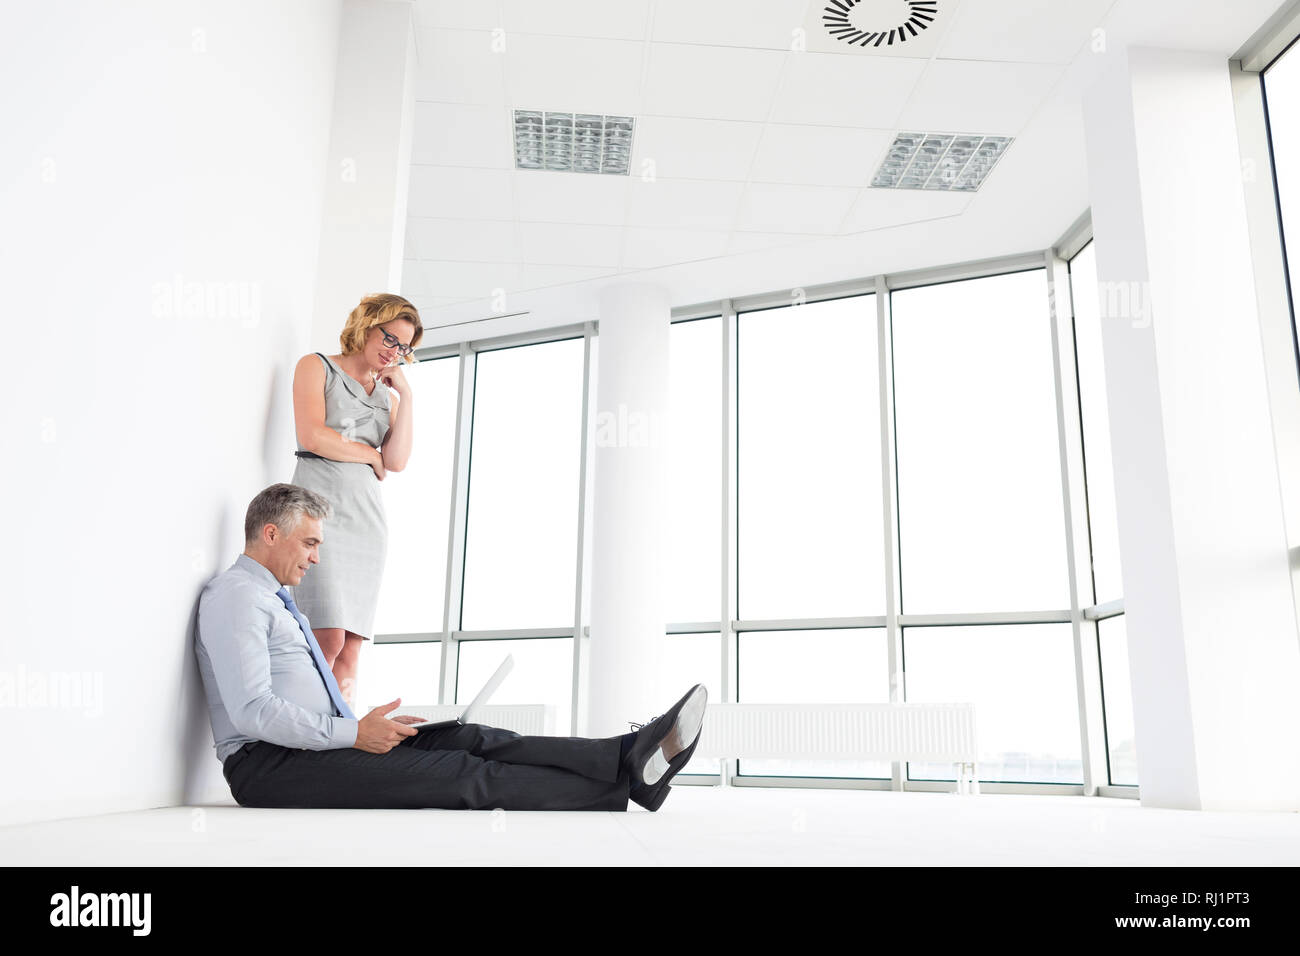 Businesswoman standing by businessman using laptop at new office Stock Photo